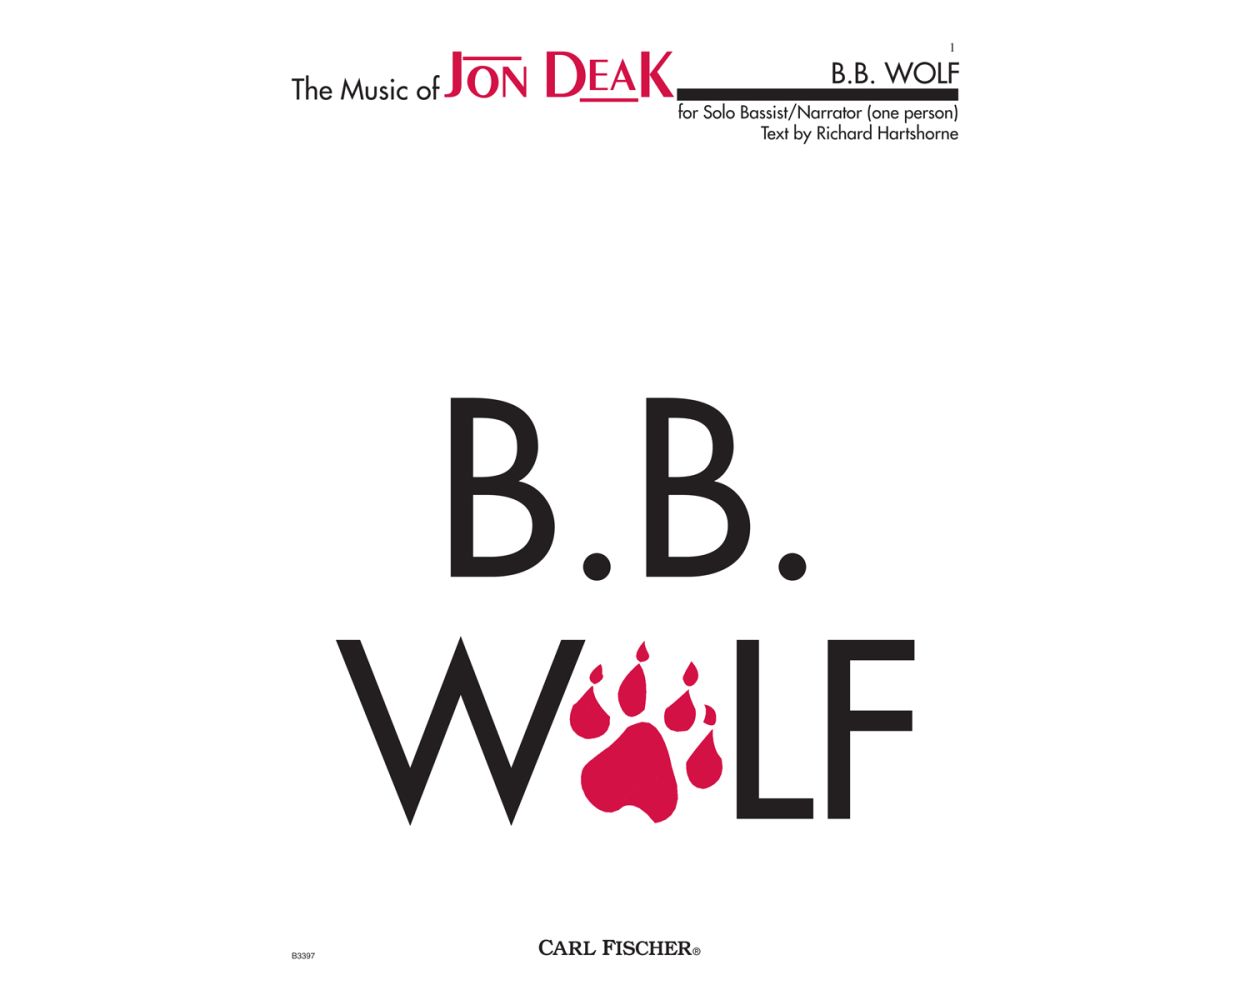 A book by Cark Fisher named the B.B. Wolf